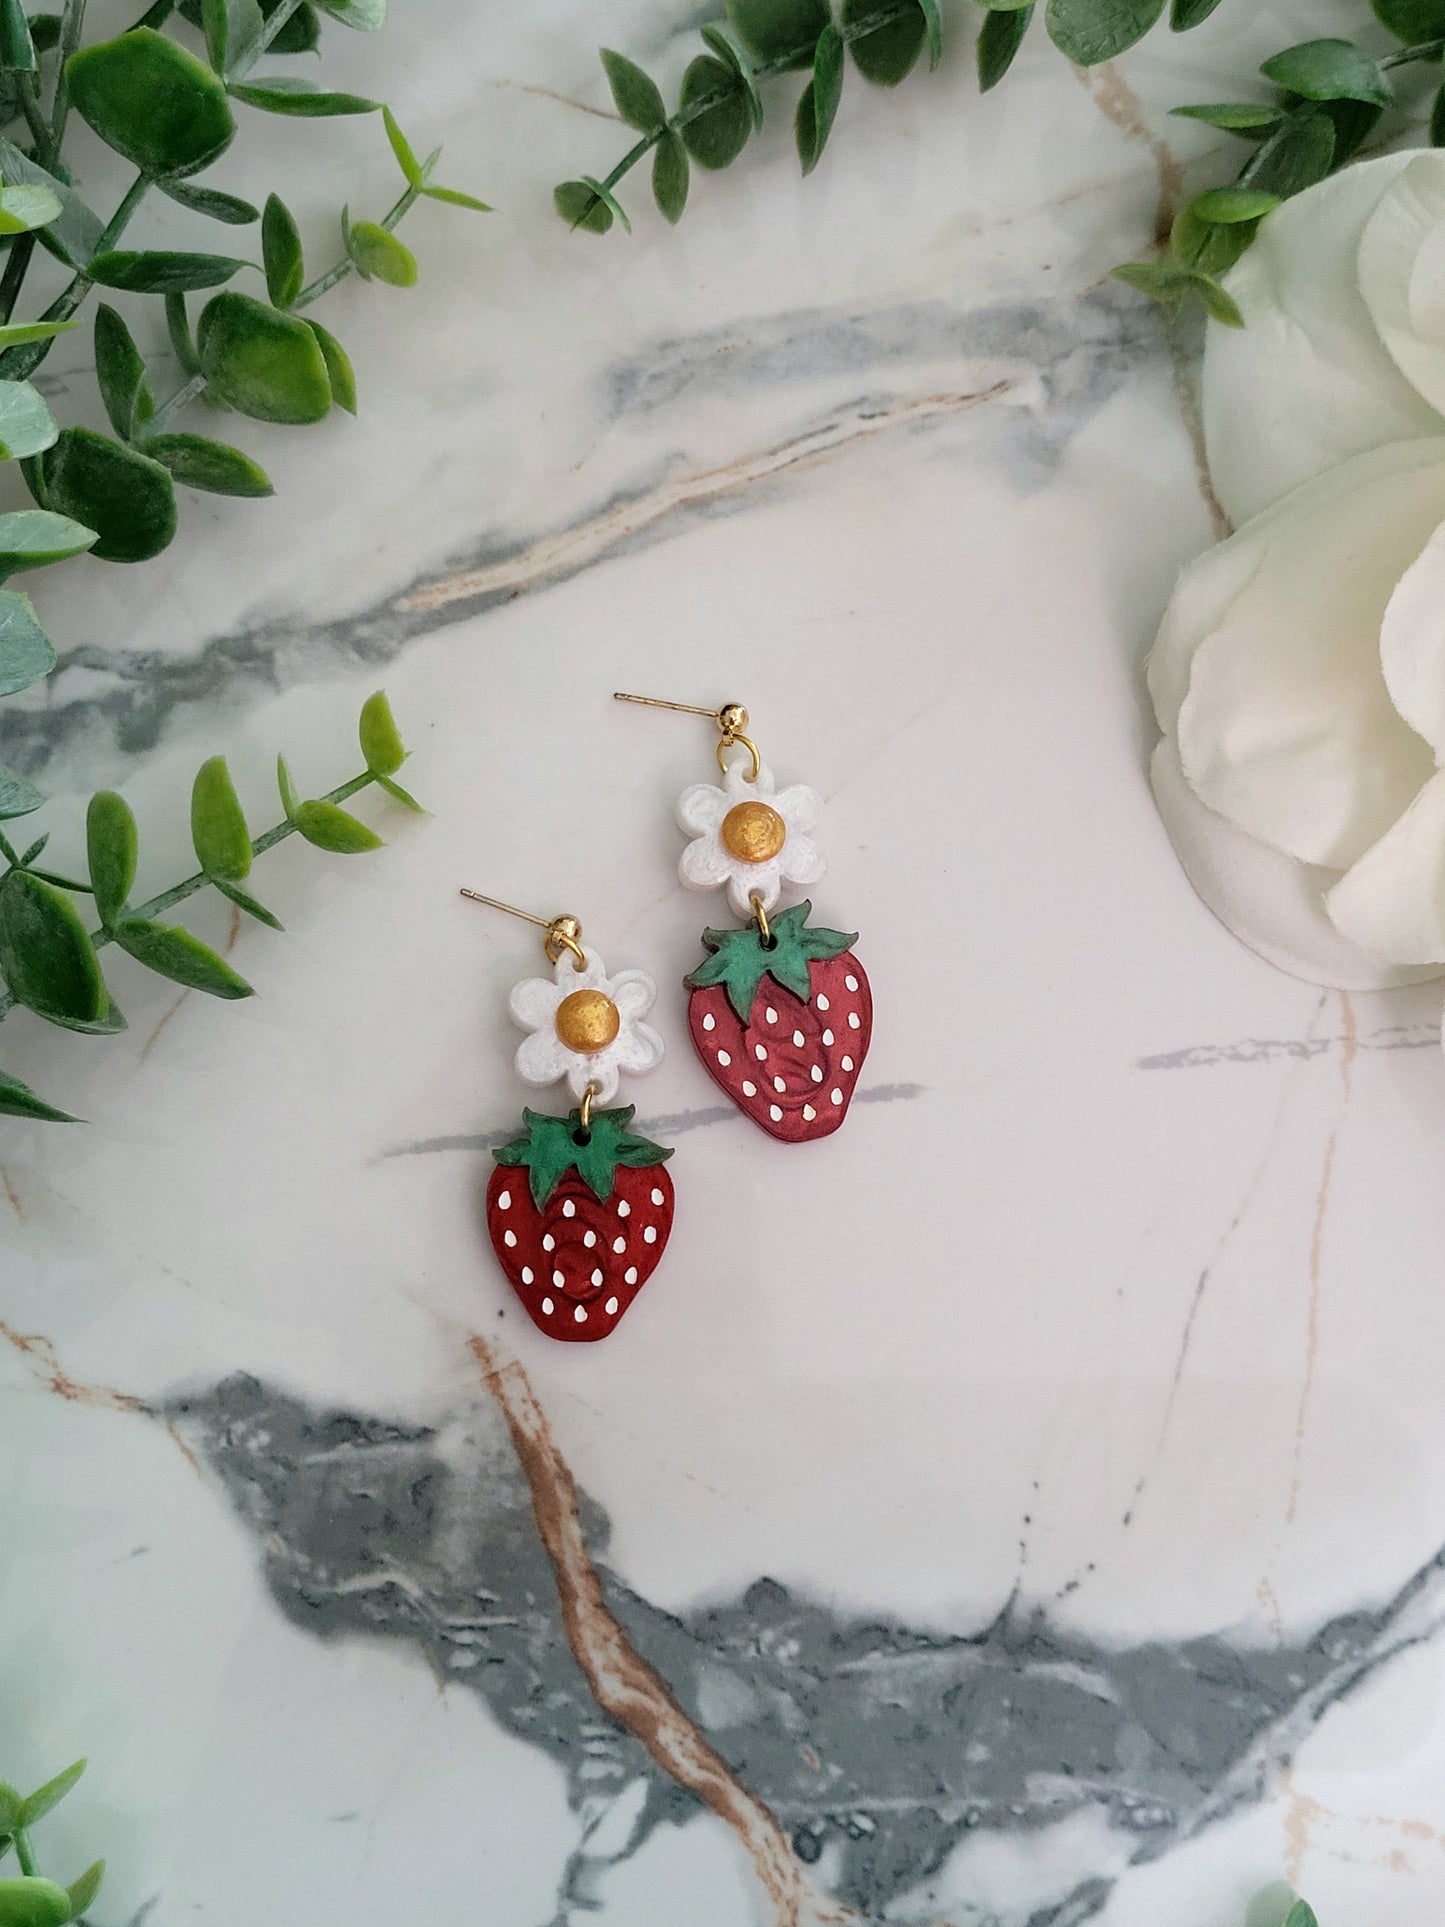 Close up of Resin Strawberry and flower earrings with gold findings on a marble background surrounded by foliage.